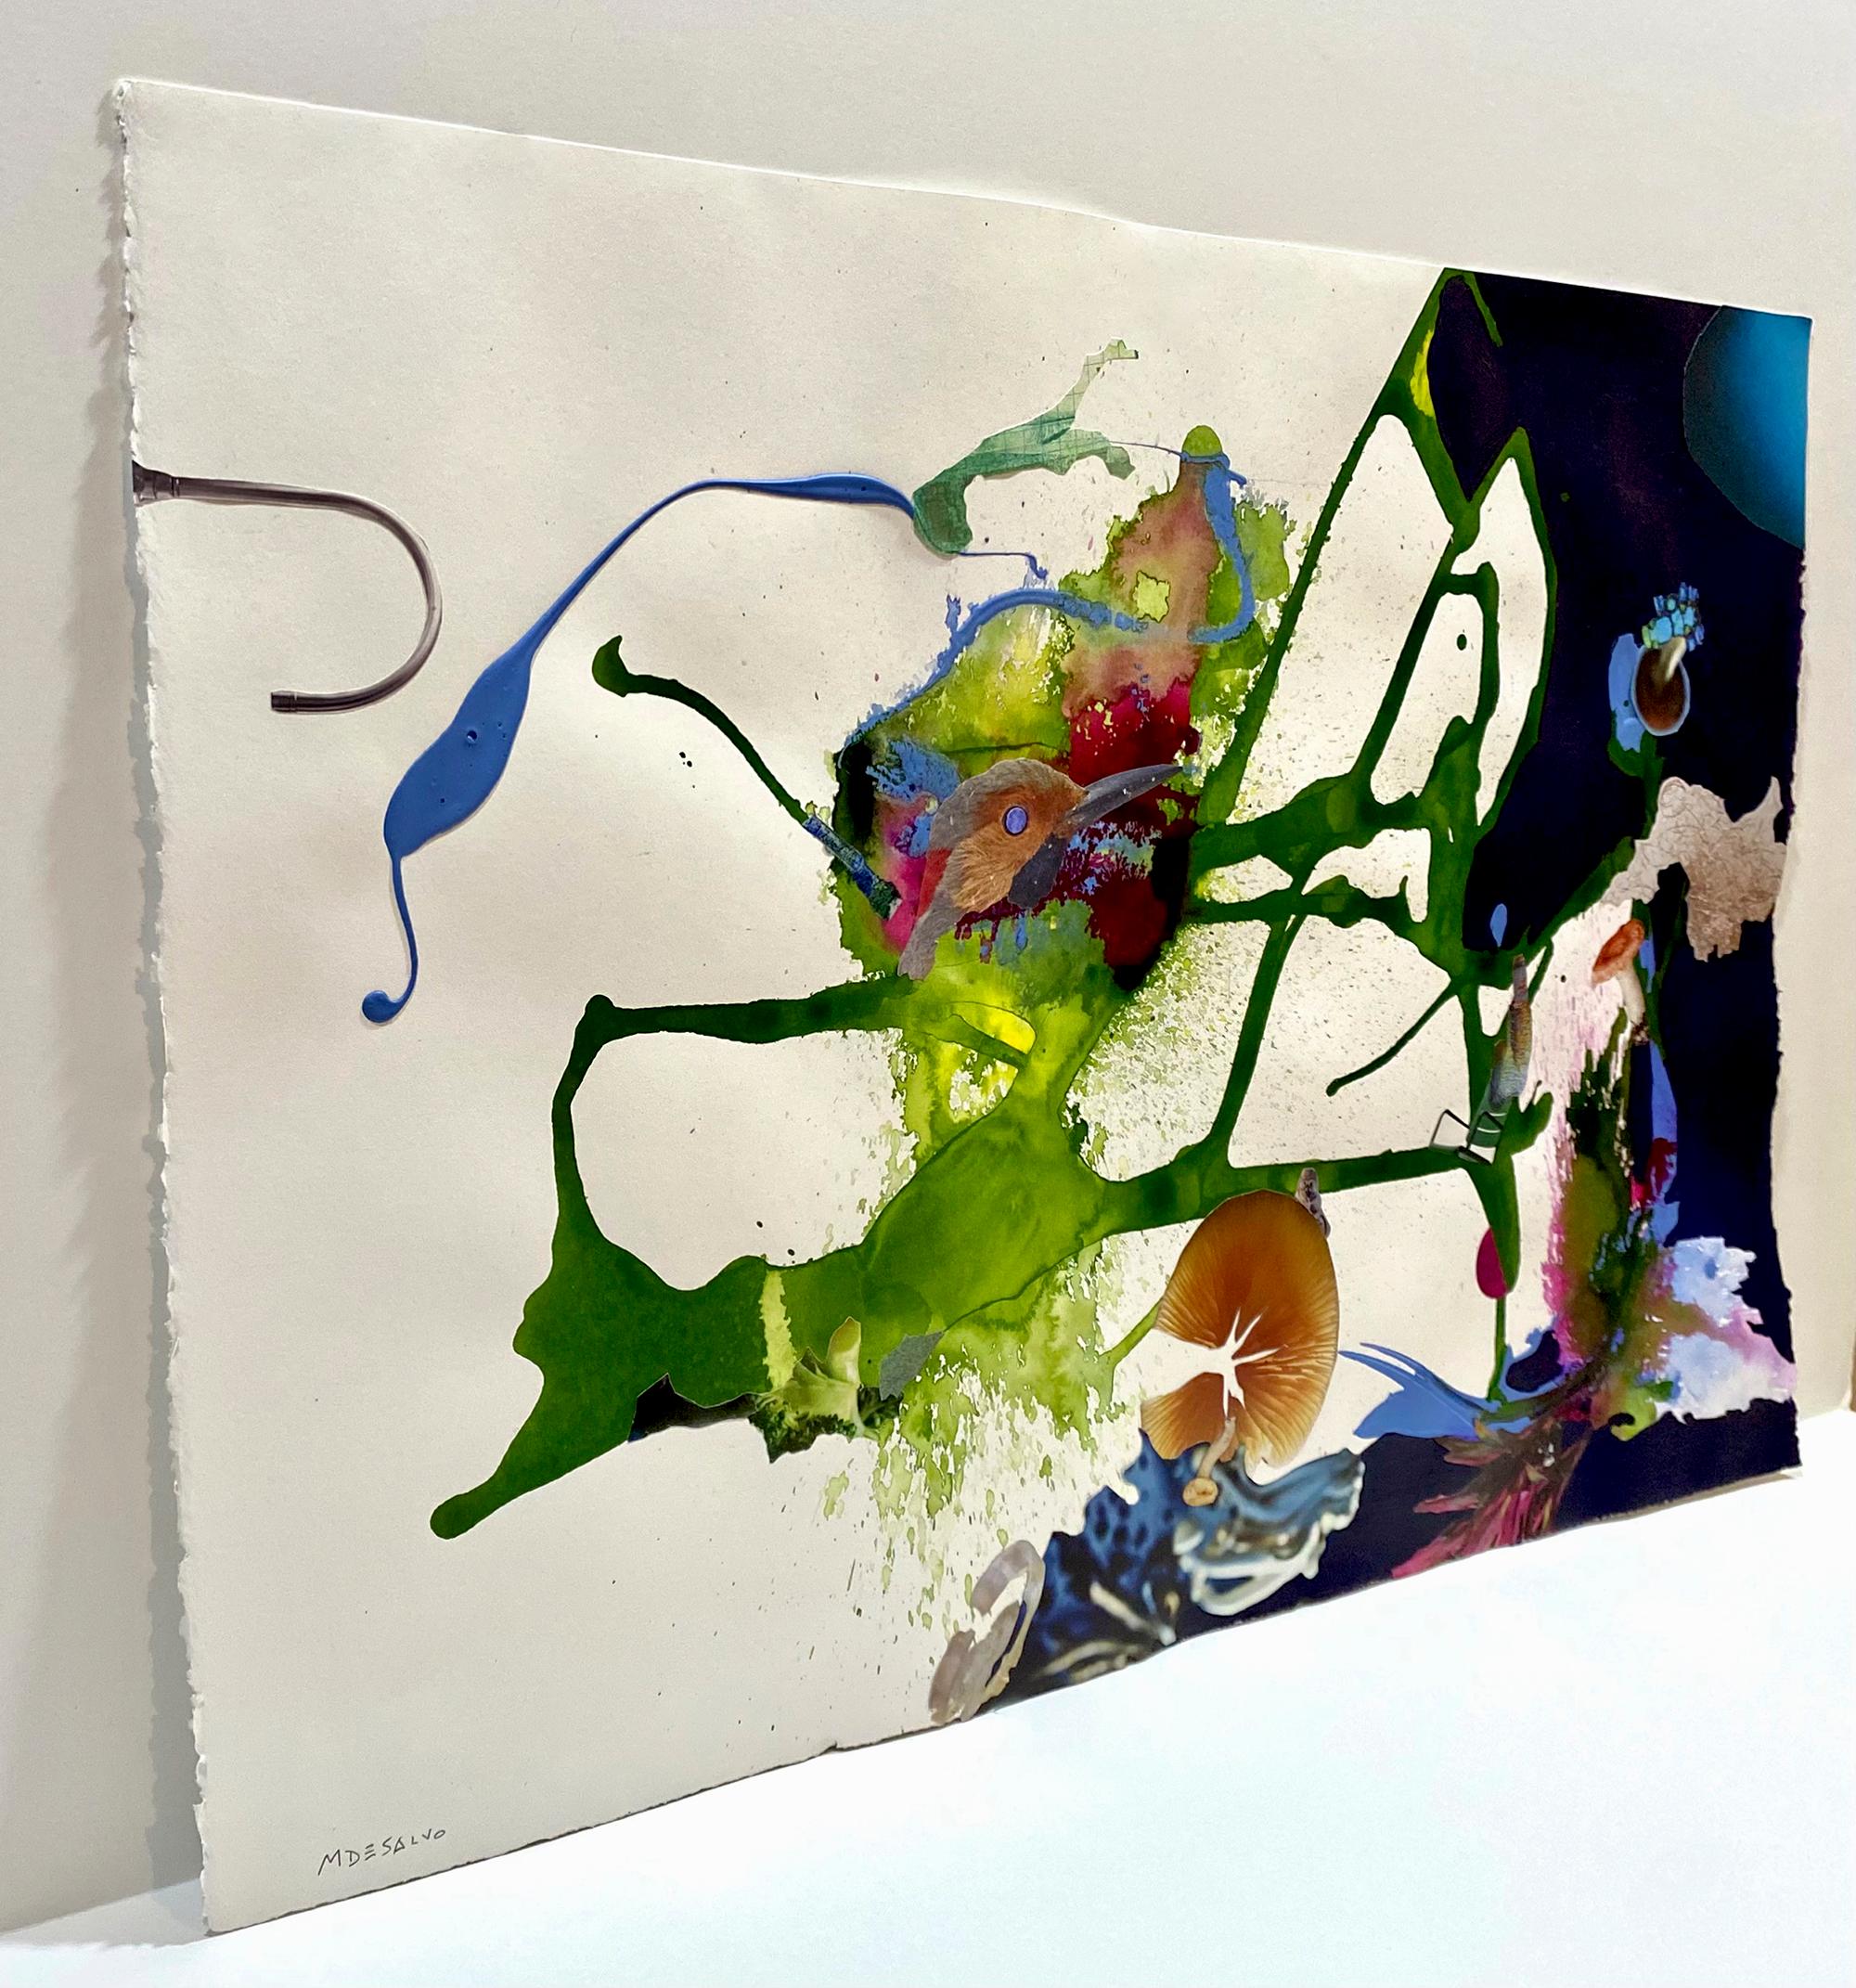 Monica DeSalvo’s “Cochlear Cornucopia” is a 15 x 22 inch surreal mixed media collage on an abstract acrylic drip painting on printmaking paper with purple, green, pink, blue, and white. On the left, crisp, elongated paint drips give way to